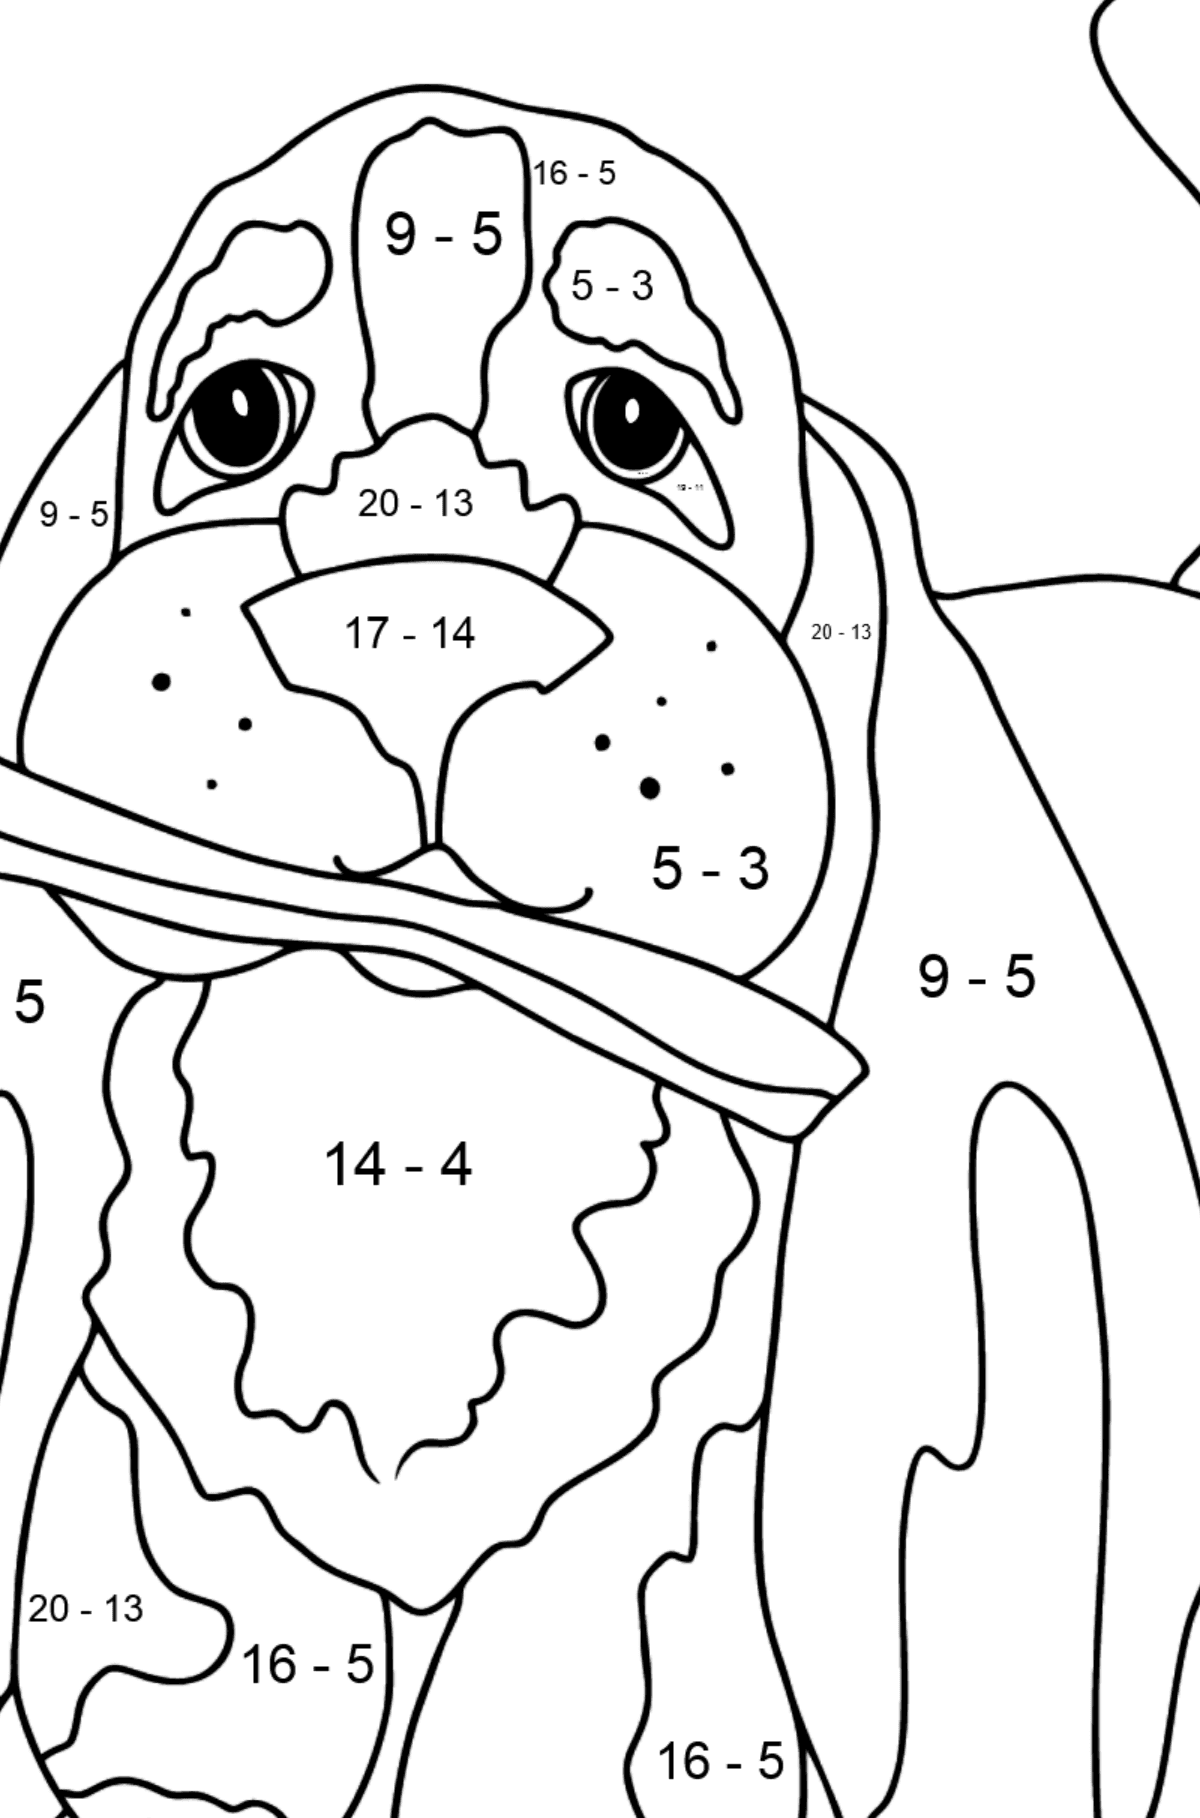 Coloring Page - A Dog is Waiting for Its Owner with a Stick - Math Coloring - Subtraction for Kids